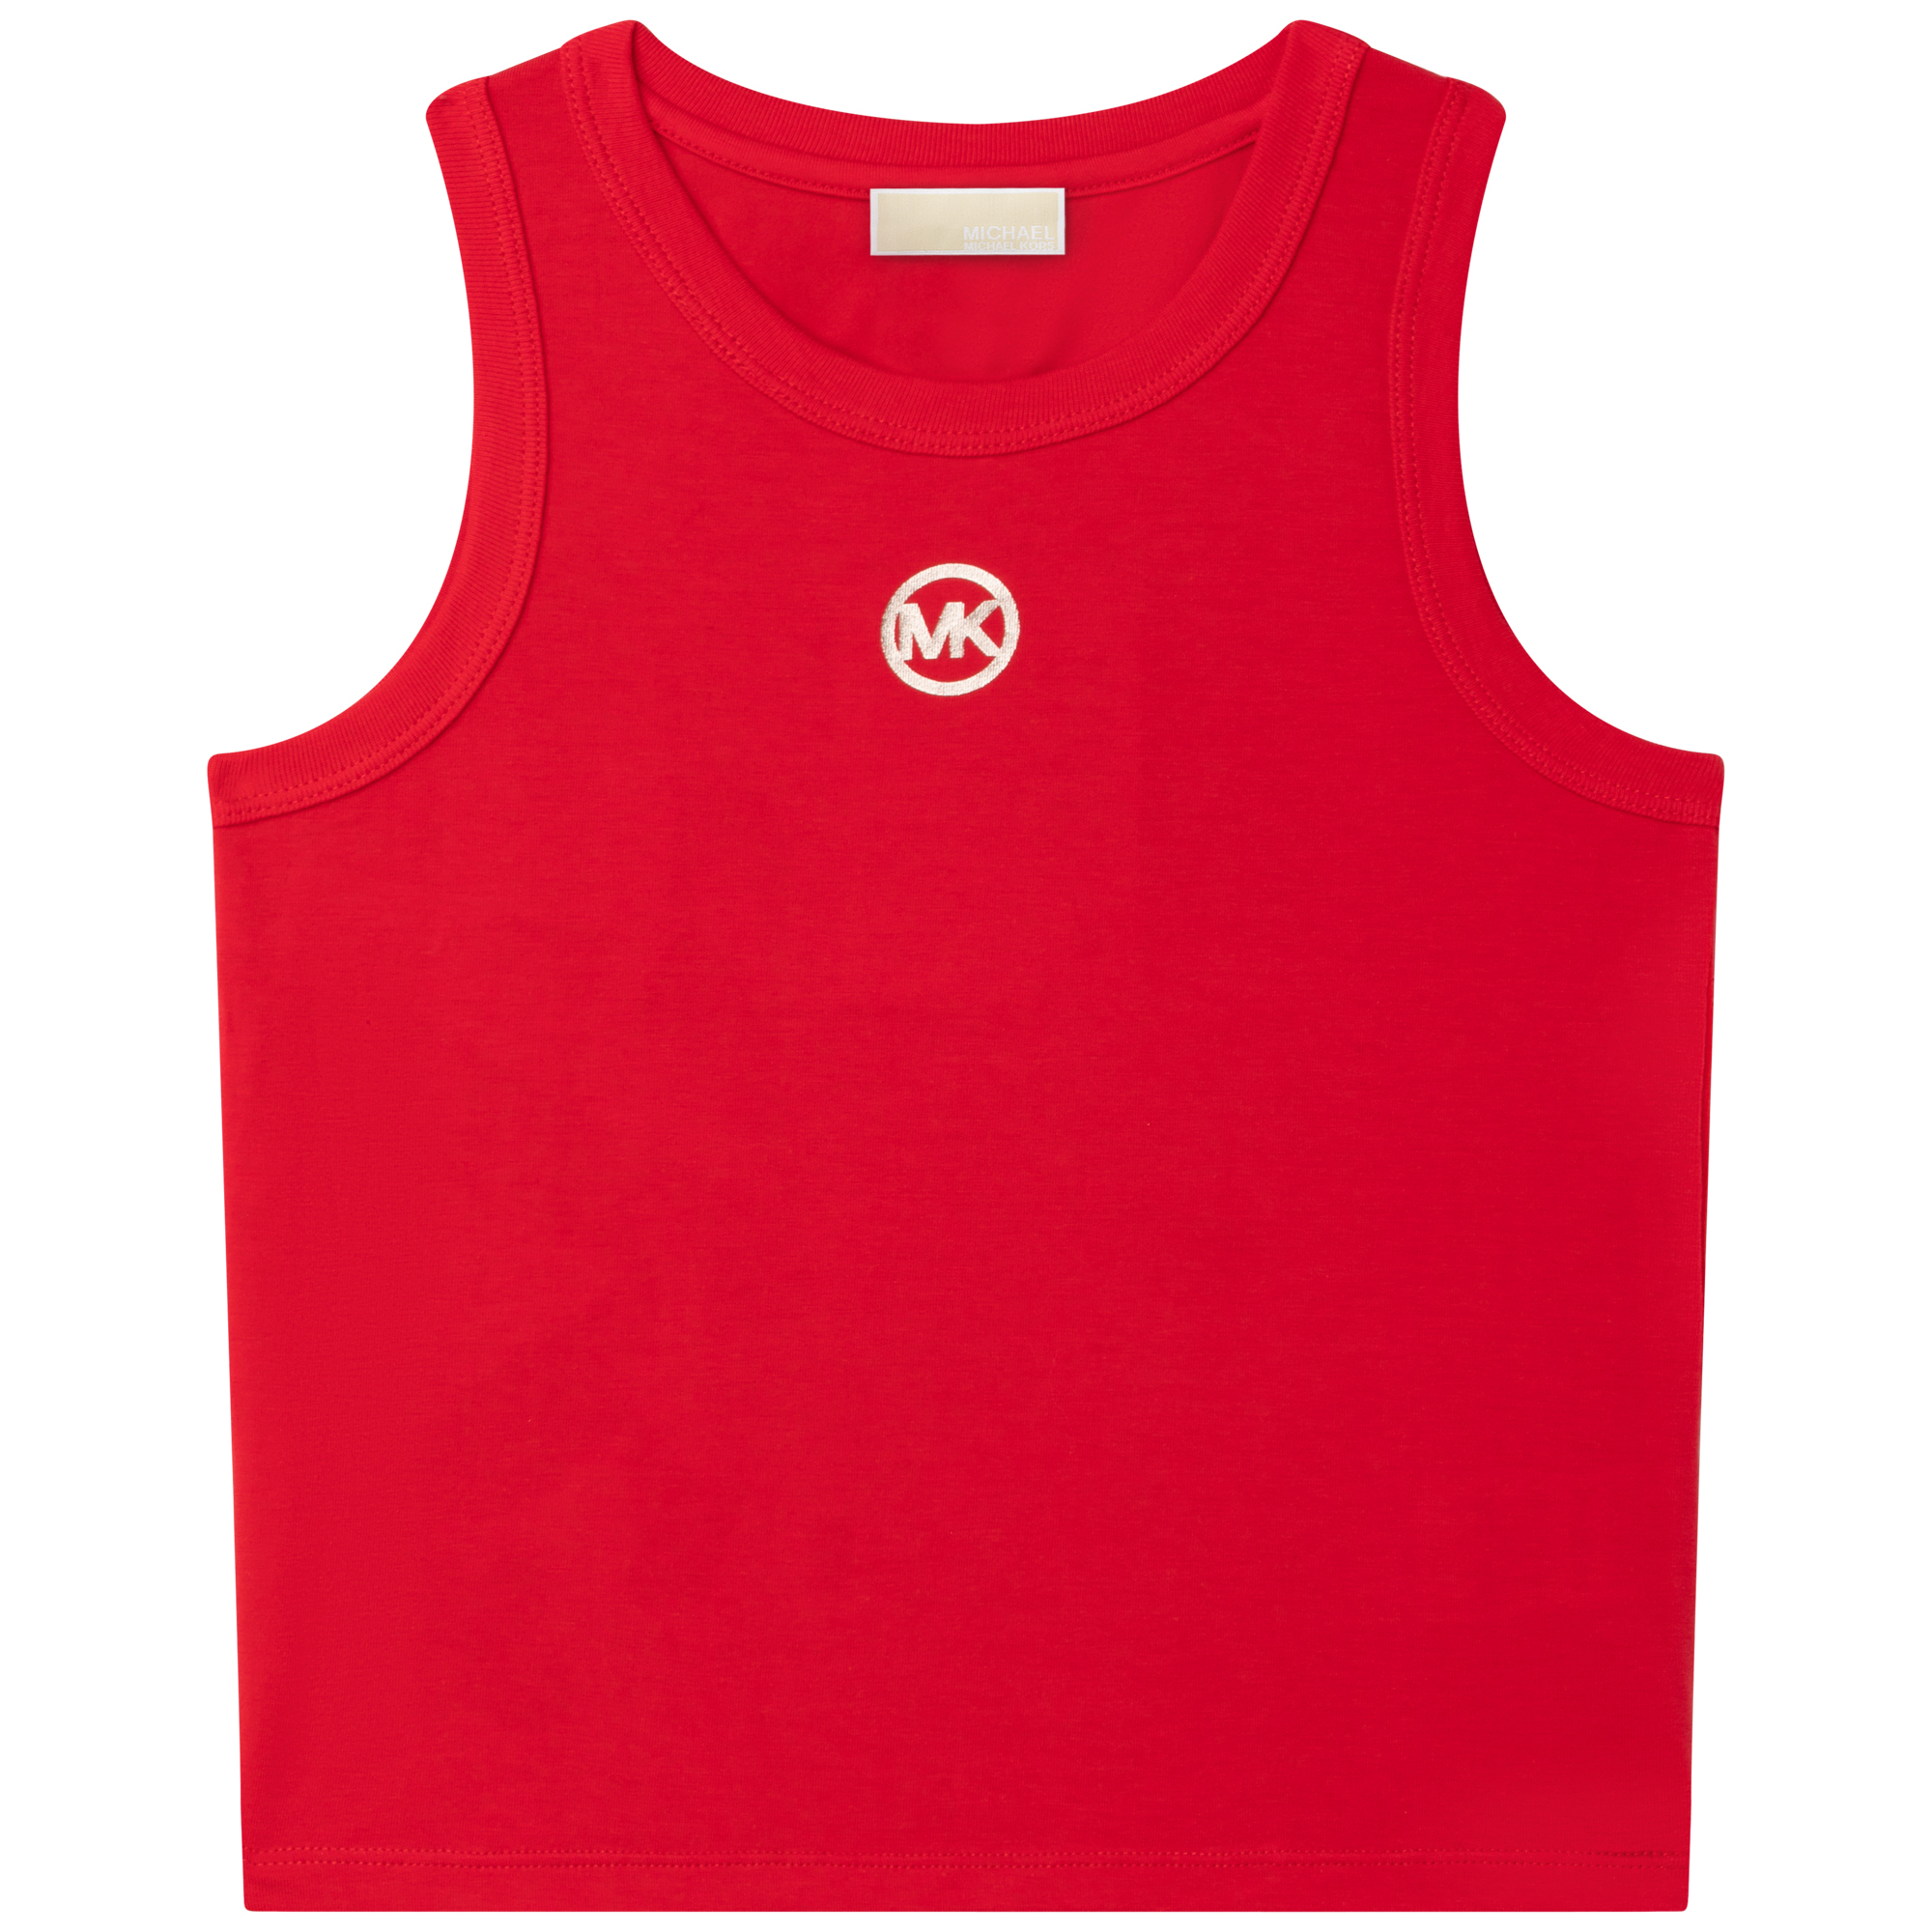 Vest top with logo MICHAEL KORS for GIRL